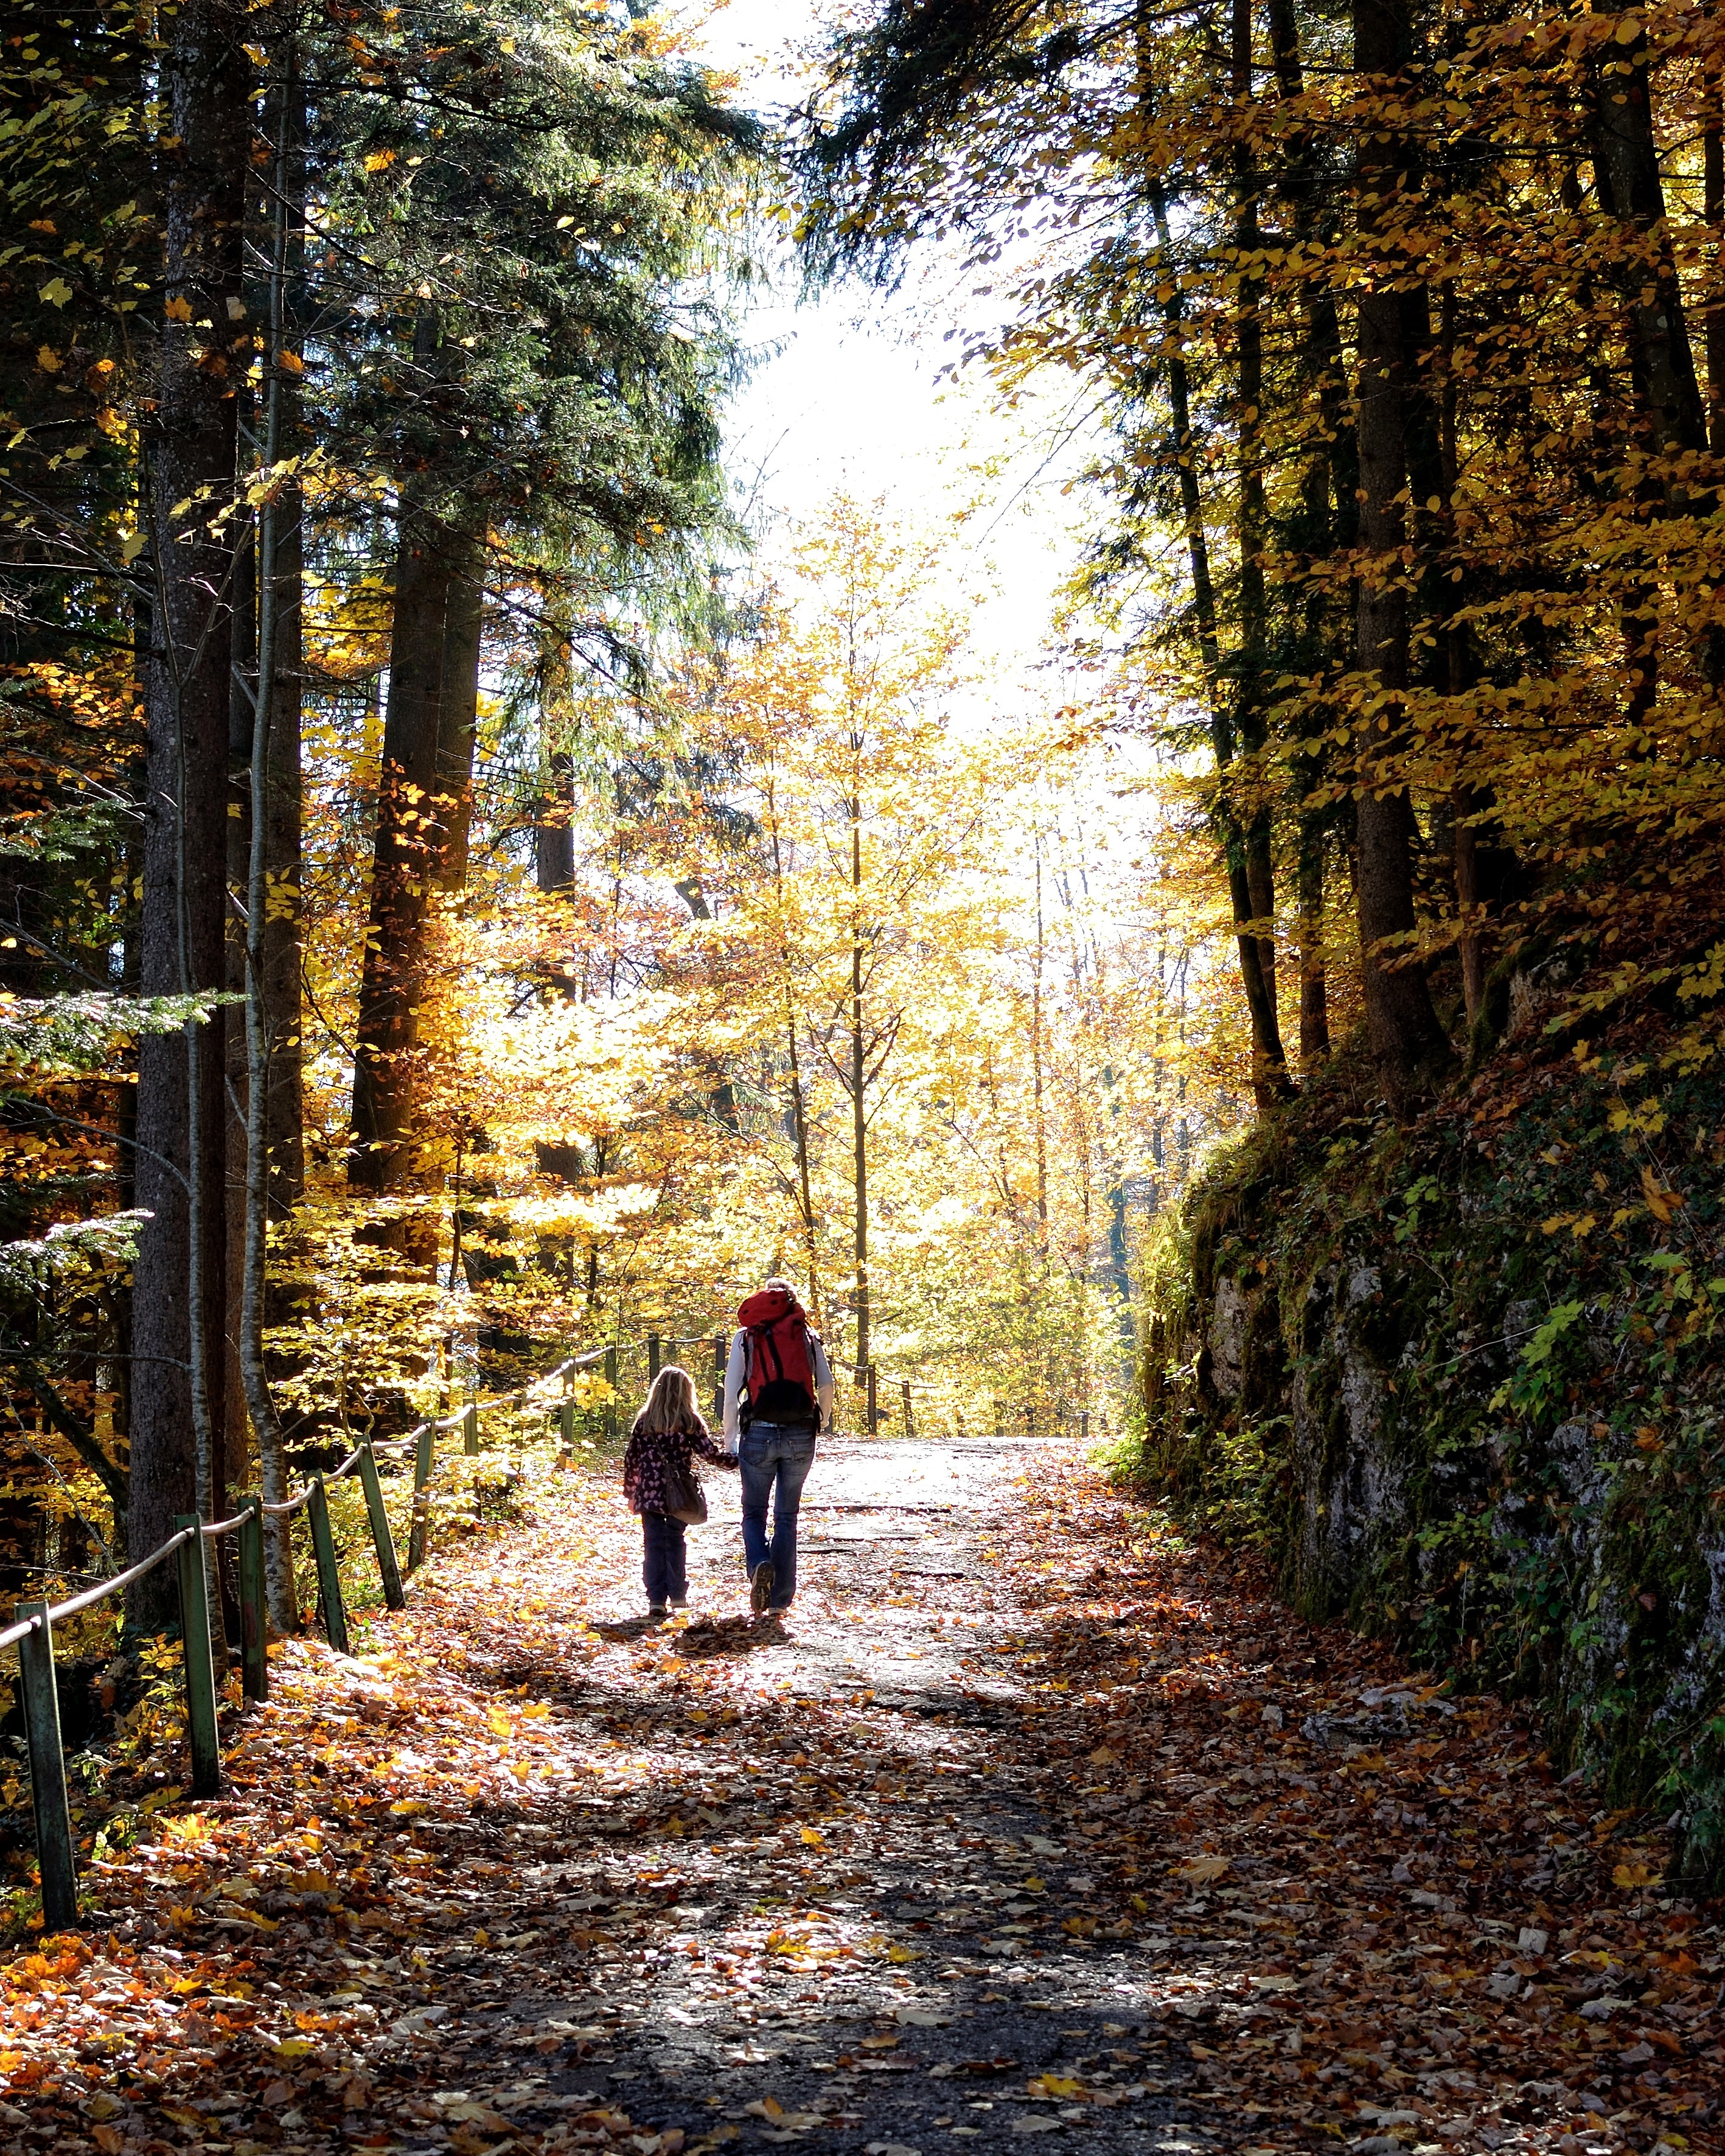 child and woman walking on unpaved road surrounded with tall trees during daytime